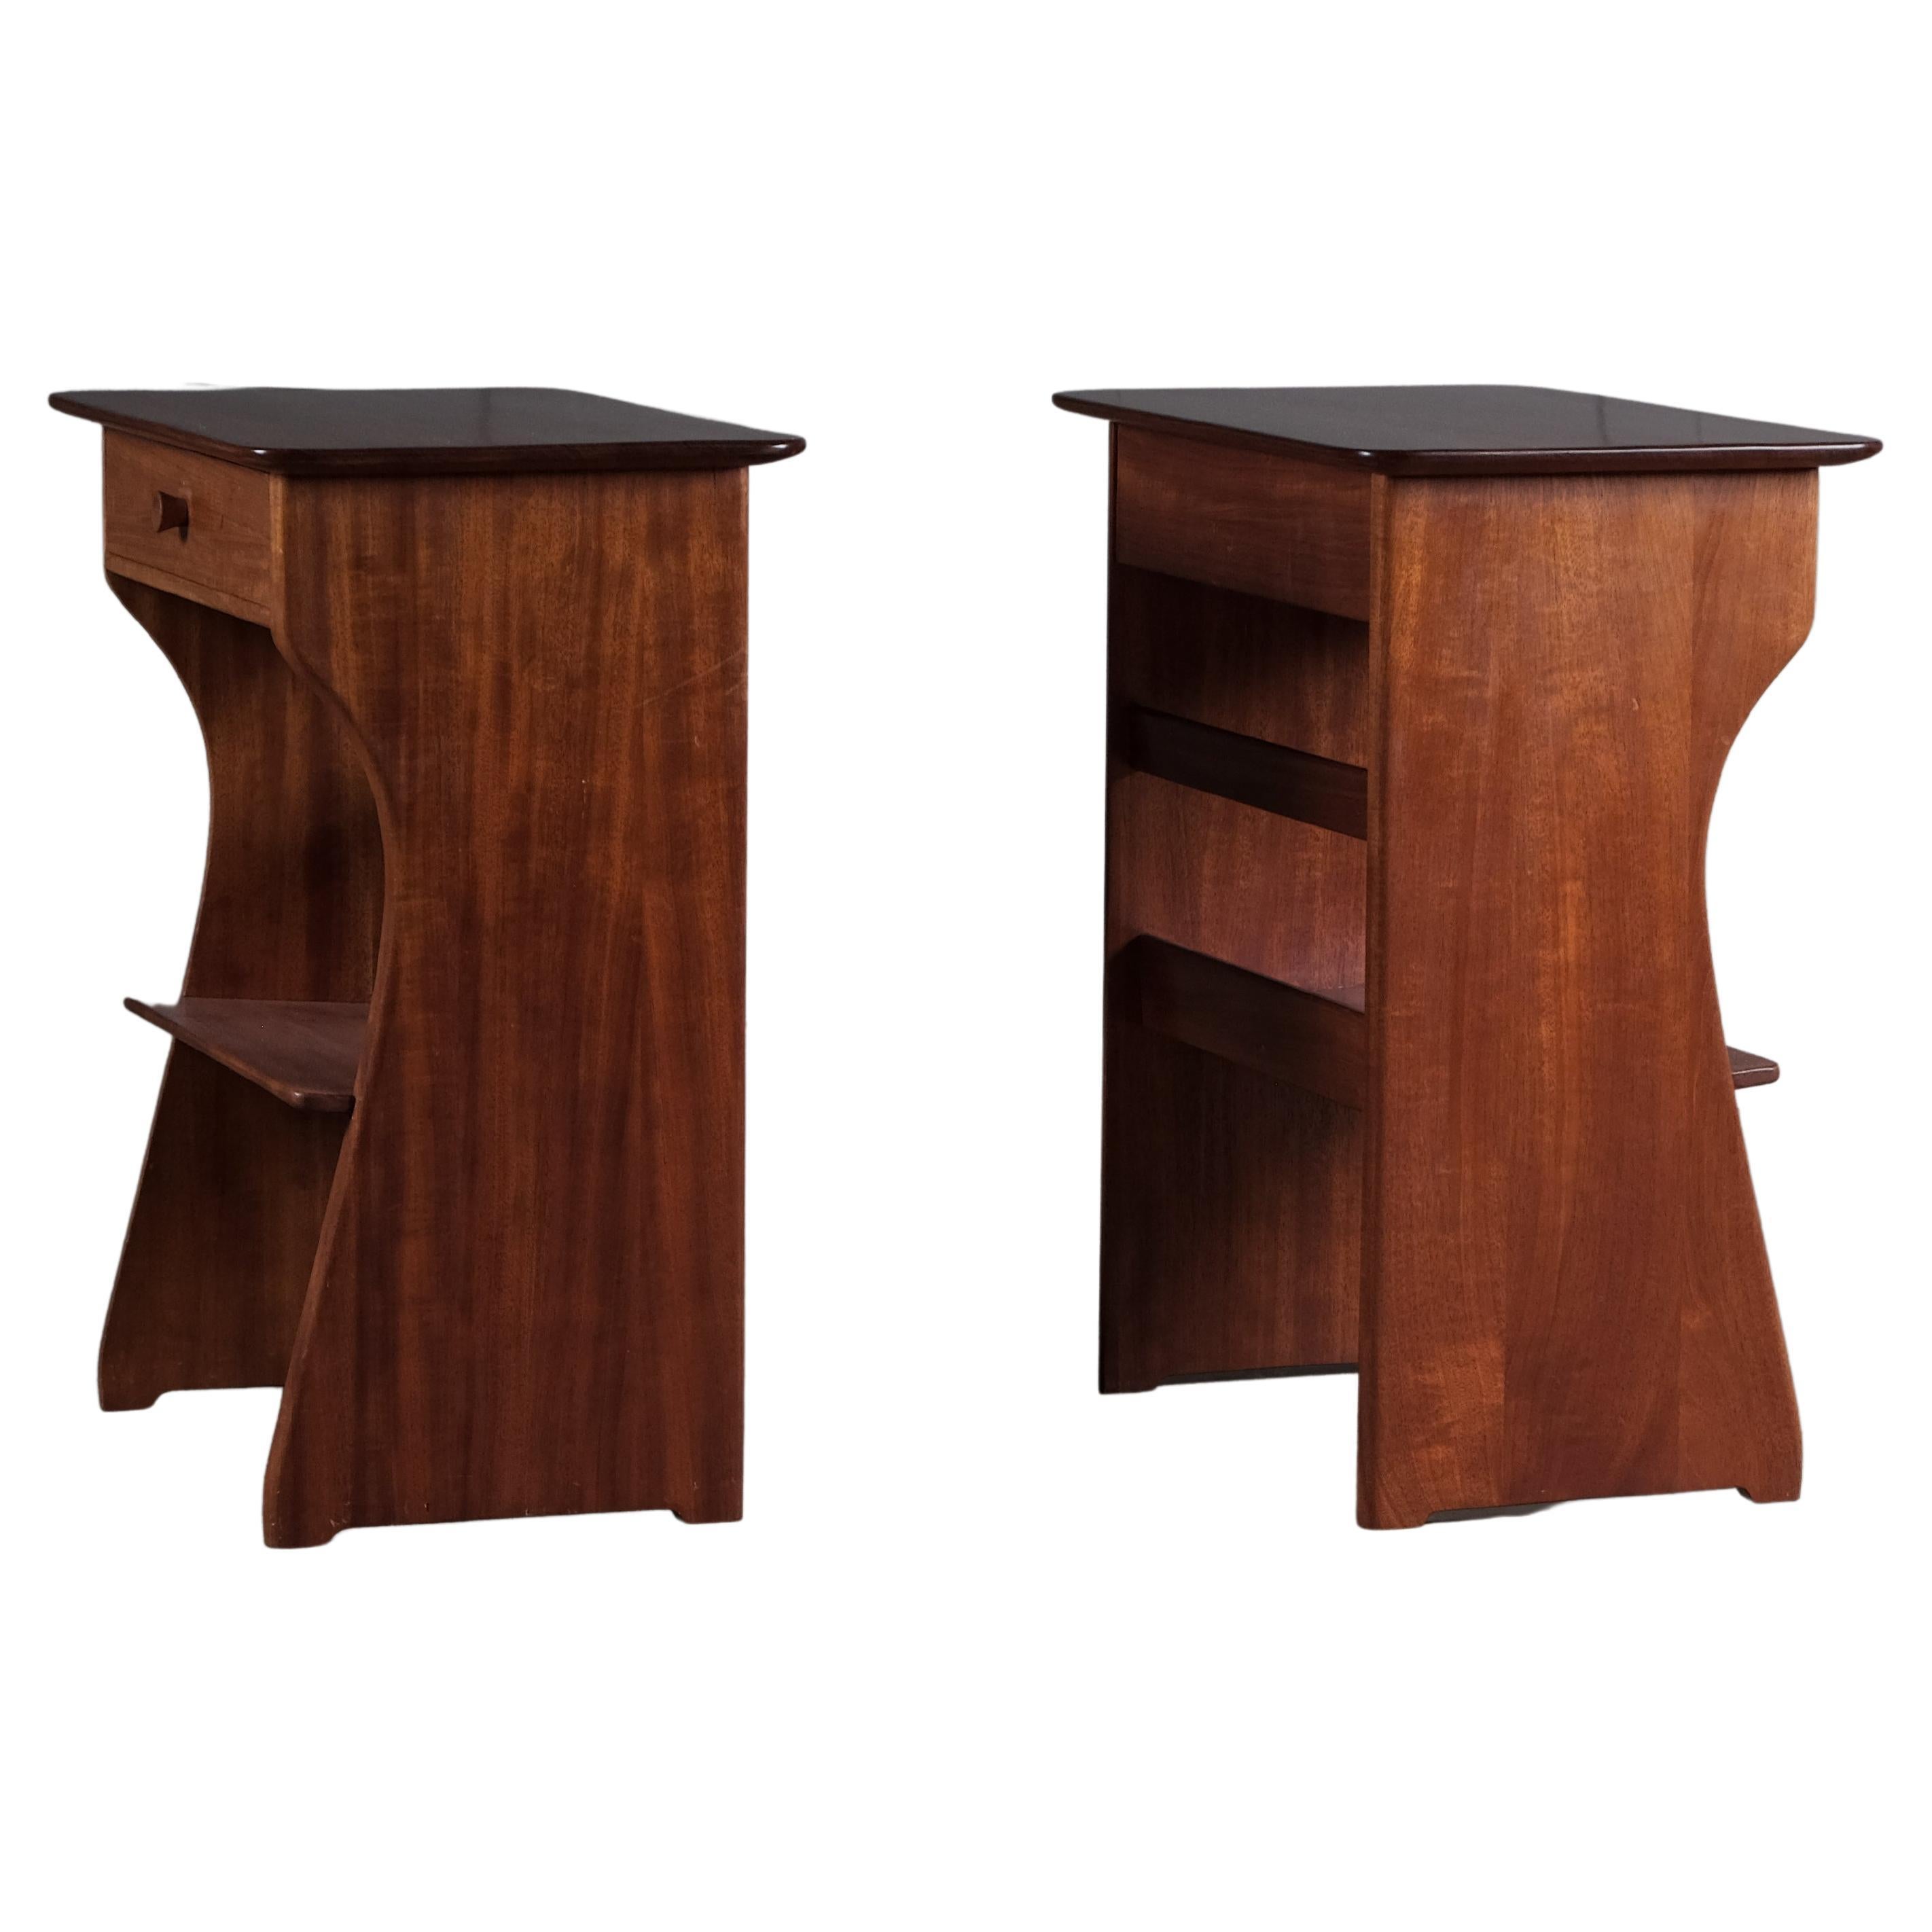 Pair of "Guldheden" Bedside Tables by Carl Malmsten, 1950s